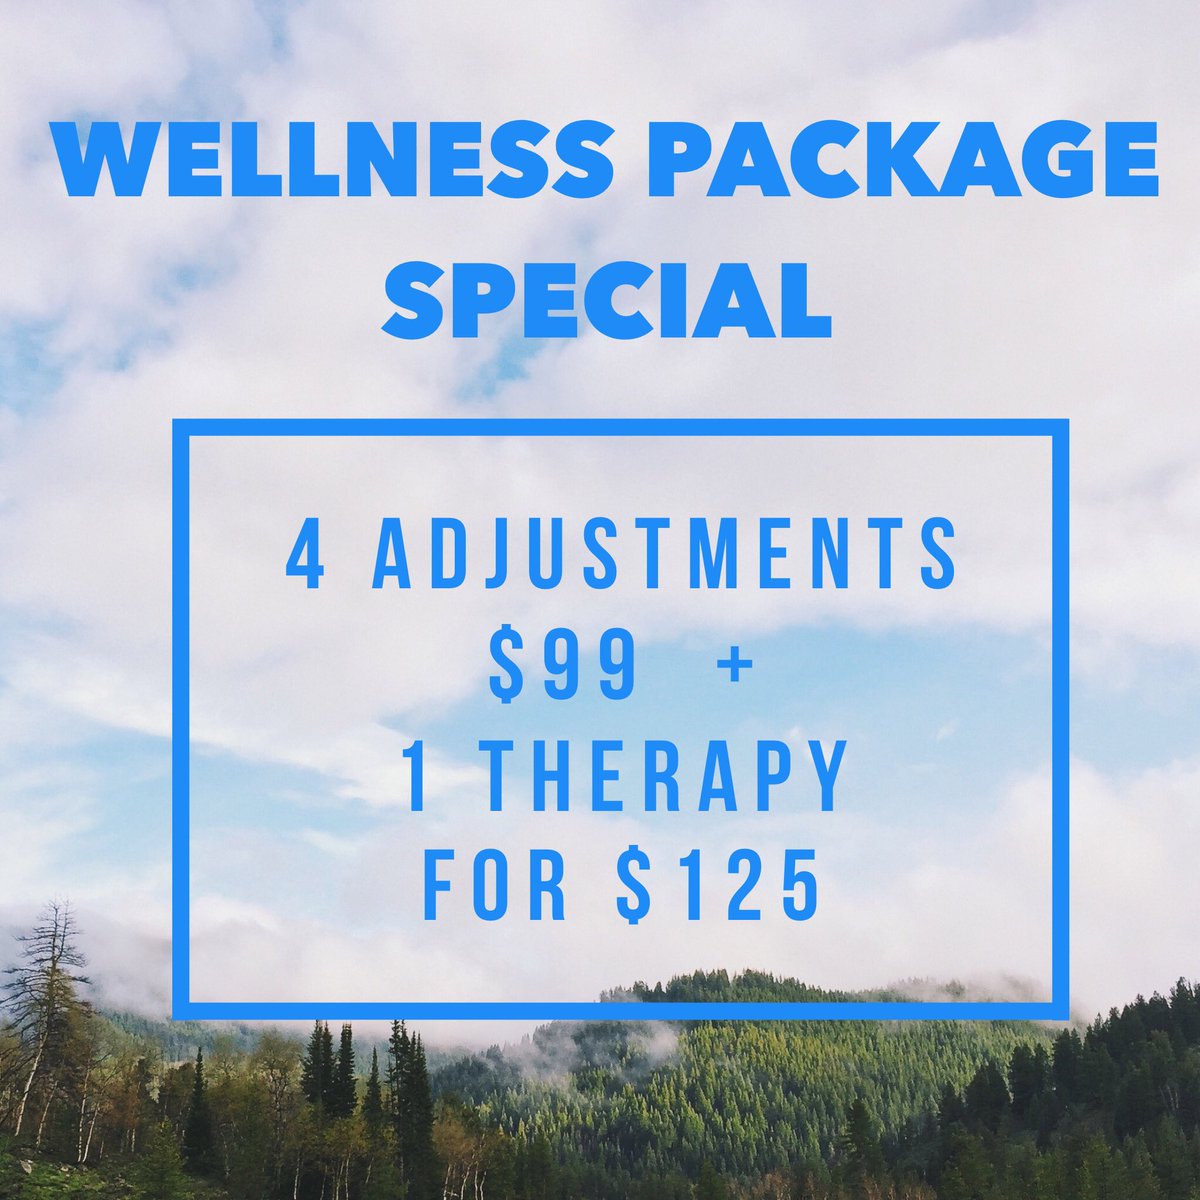 Are you serious about chiropractic adjustments ? If so, this mayspecial is for you! Our wellness package special includes 4 adjustments for $99 + add 1 therapy for only $125! Call today to take advantage of this special offer: 561.969.3232
#palmbeachmedical